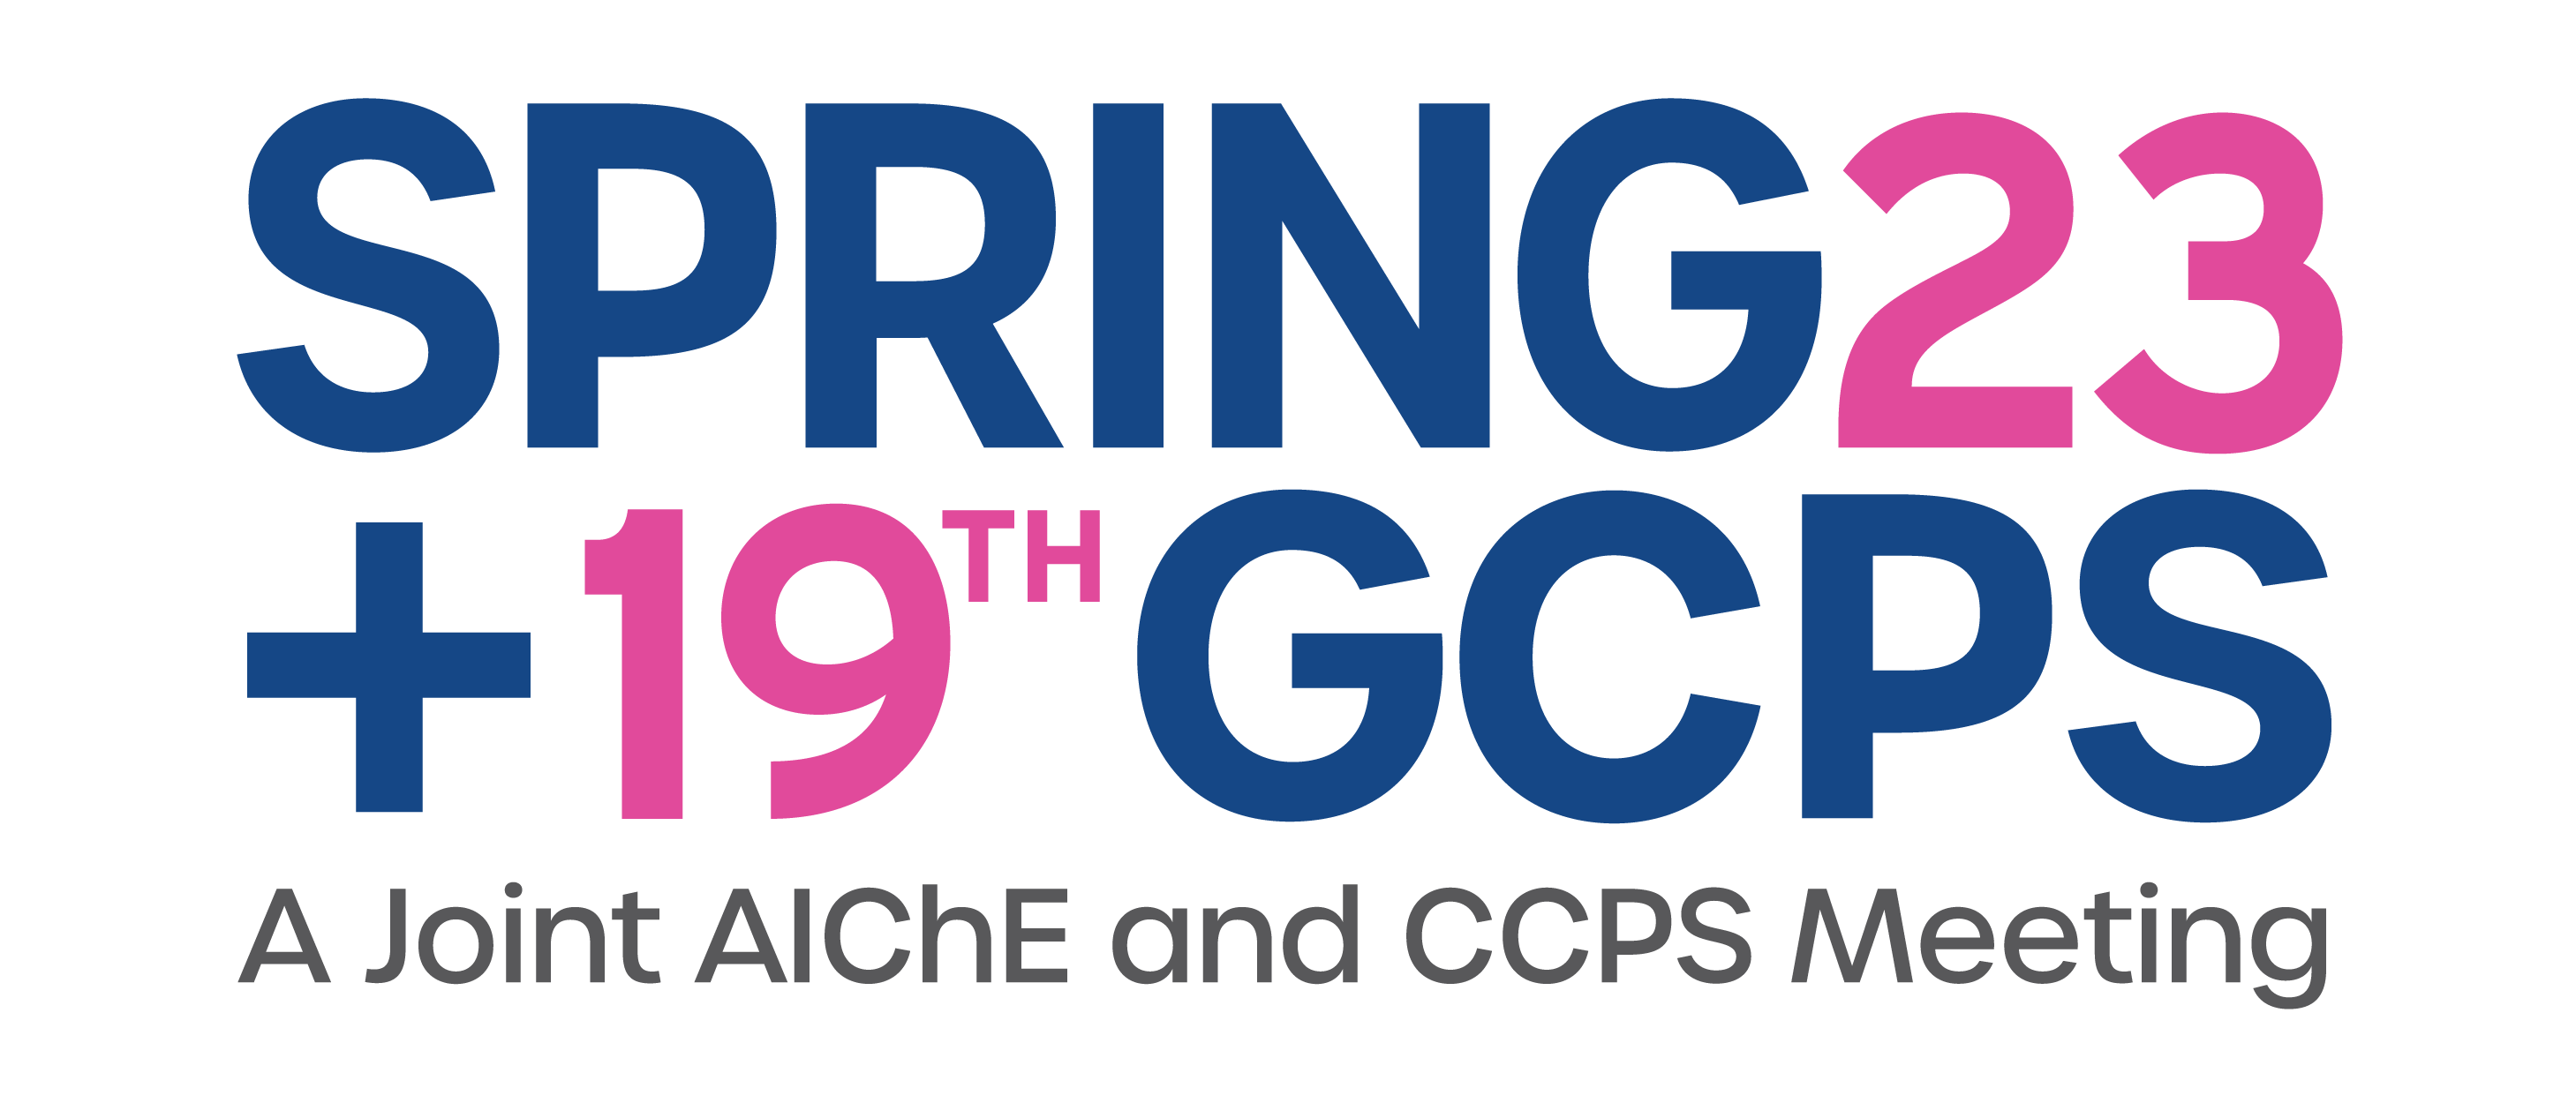 2023 Spring Meeting and 19th Global Congress on Process Safety AIChE